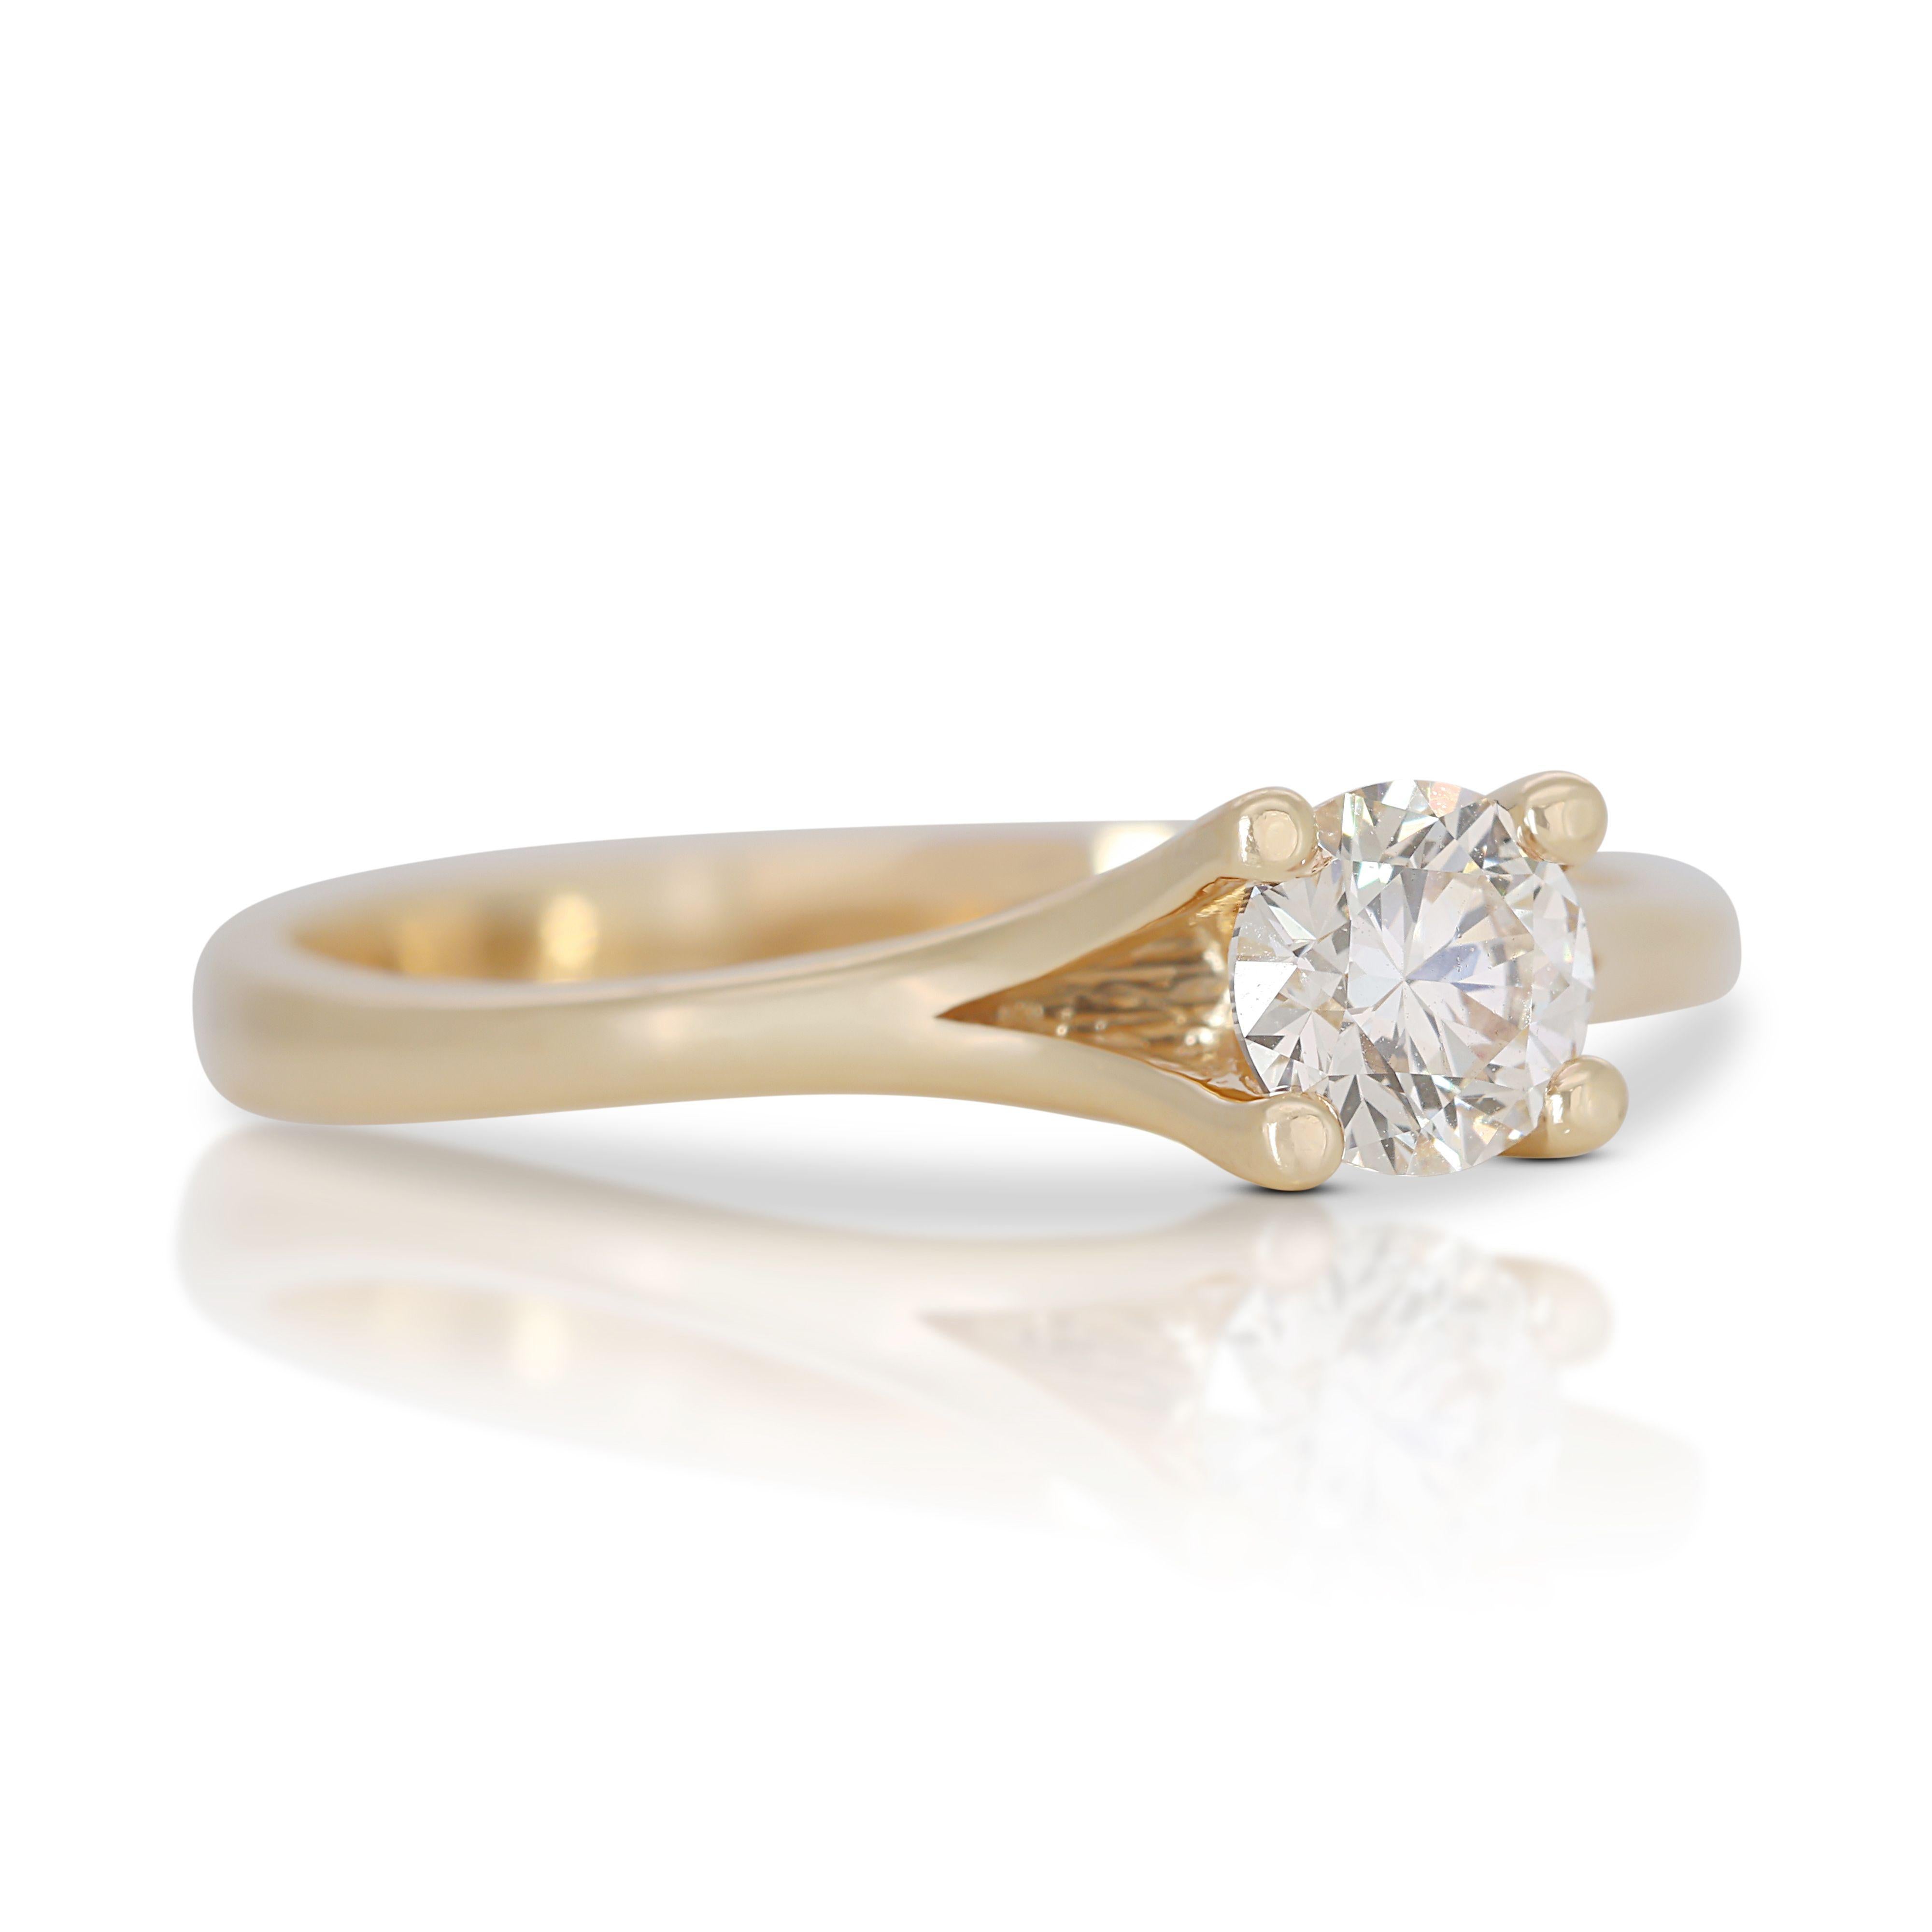 Enchanting Solitaire: 0.38 ct Diamond Shimmers in Warm 14K Gold In New Condition For Sale In רמת גן, IL